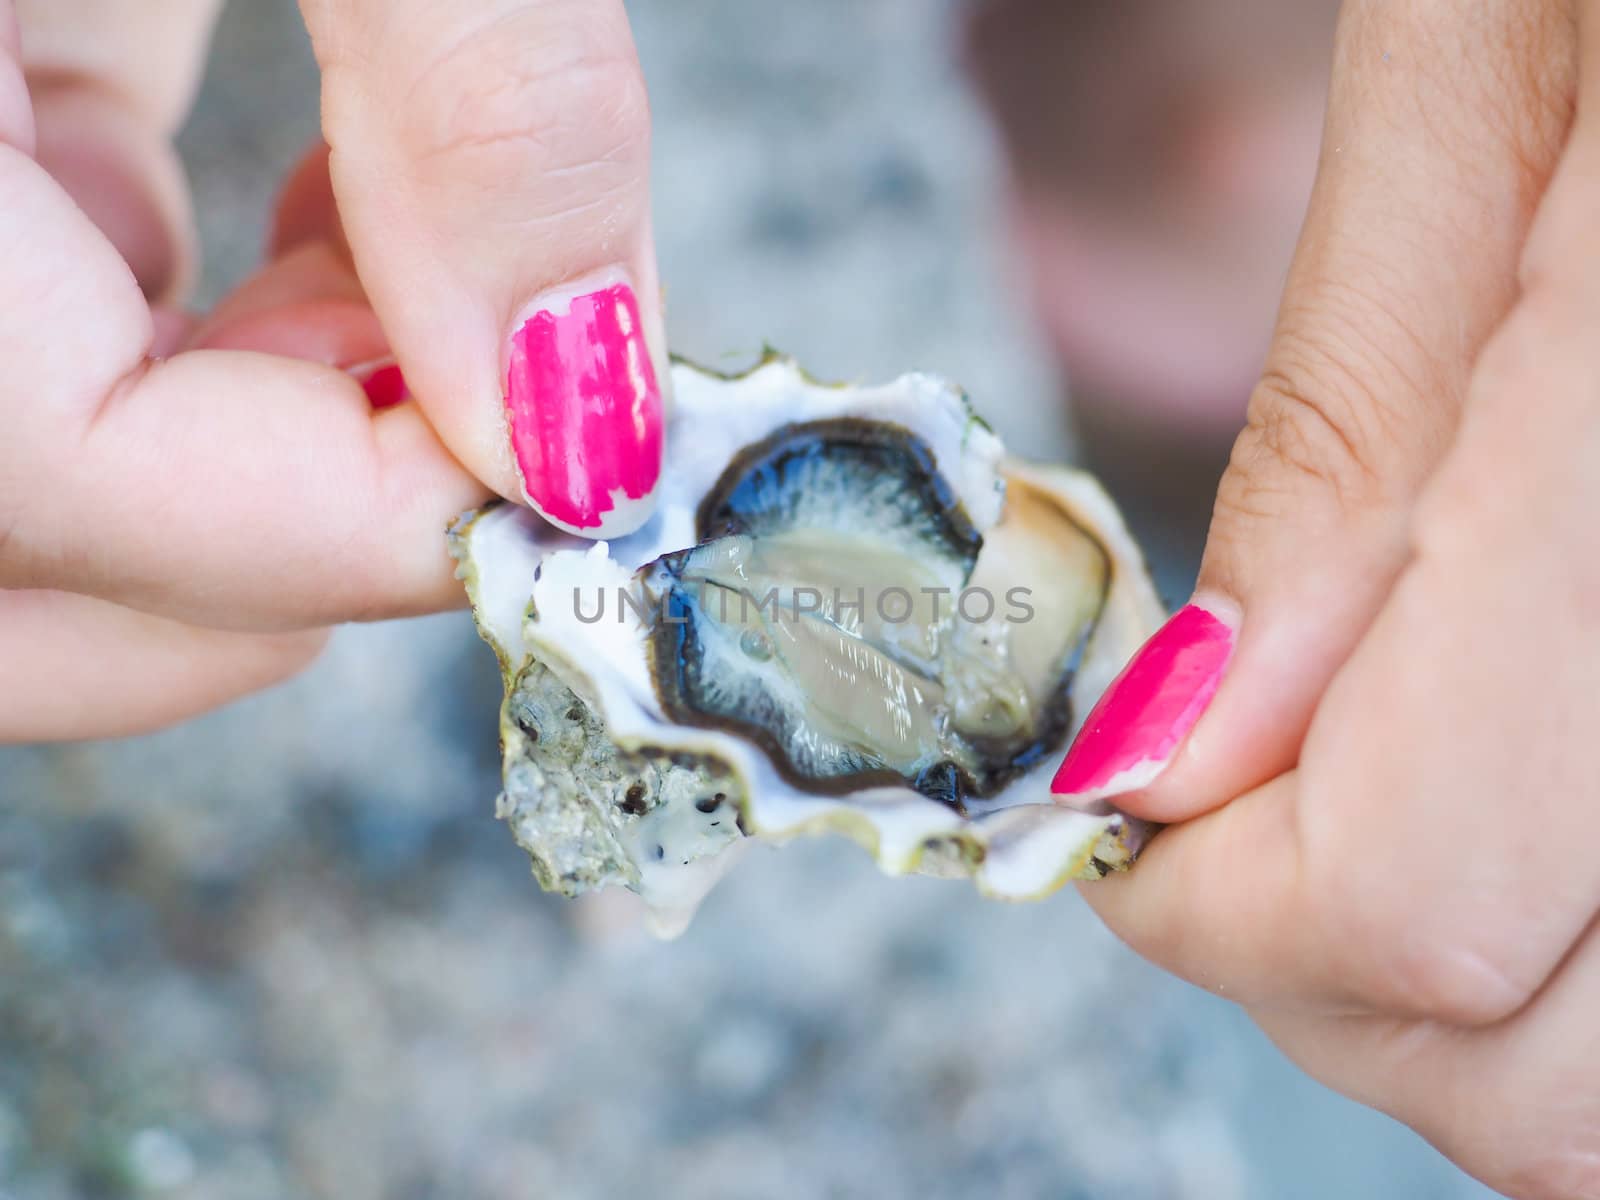 Female person holding an oyster mussel wide open with pink nail  by Arvebettum